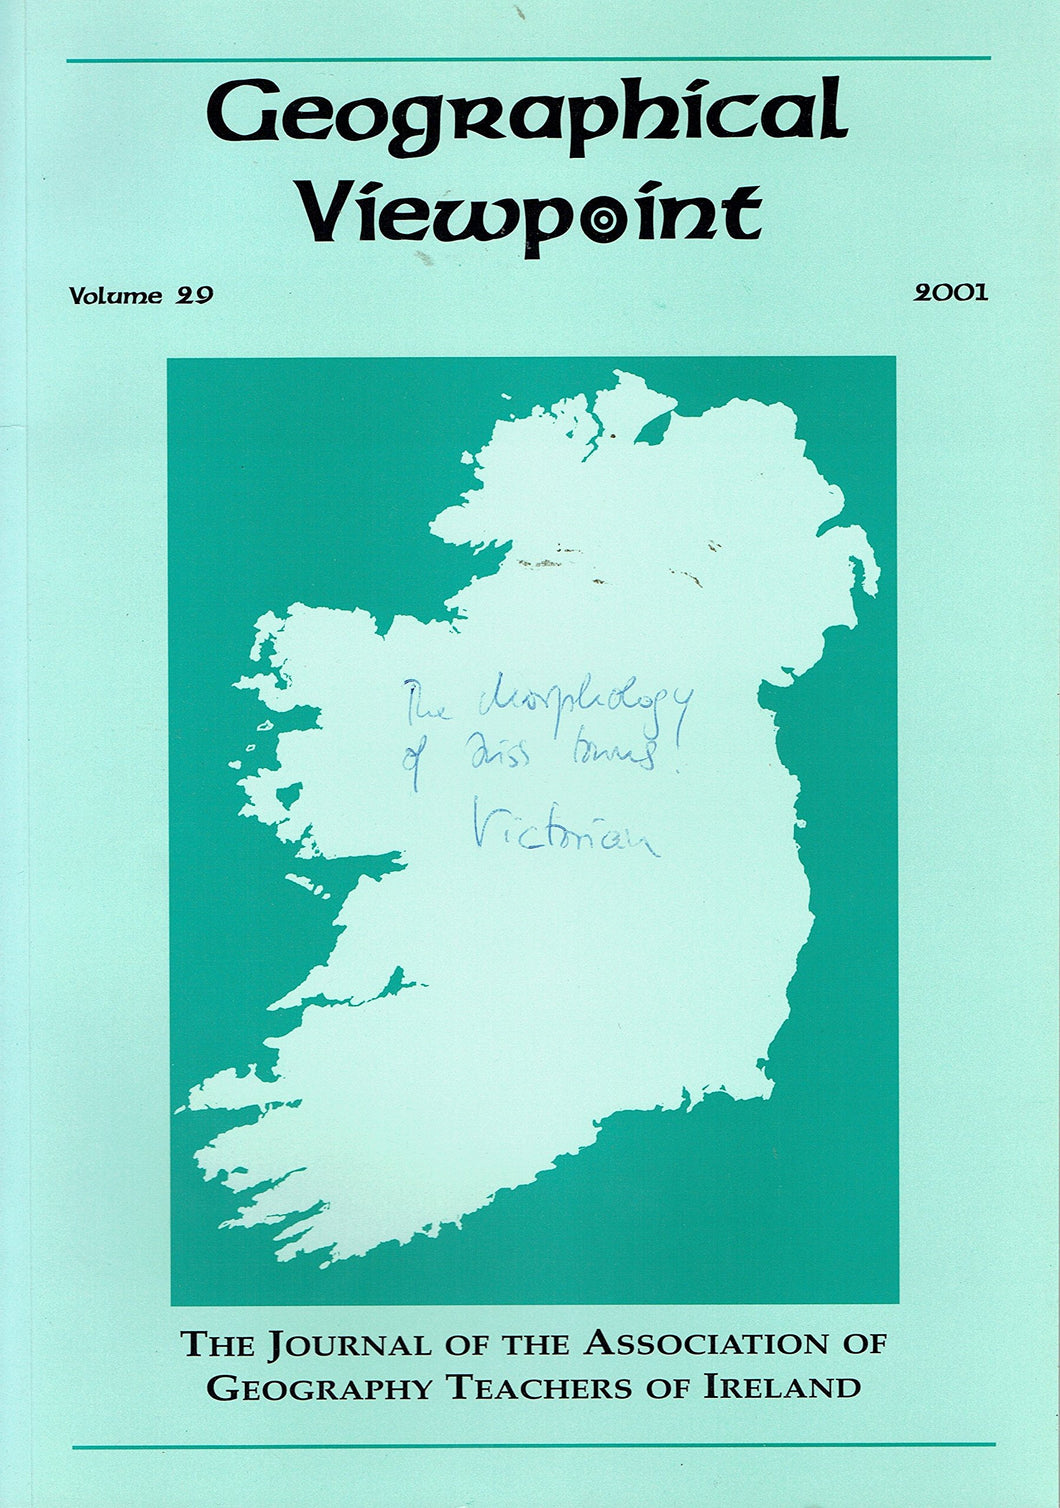 Geographical Viewpoint - The Journal of the Association of Geography Teachers of Ireland, Volume 29, 2001